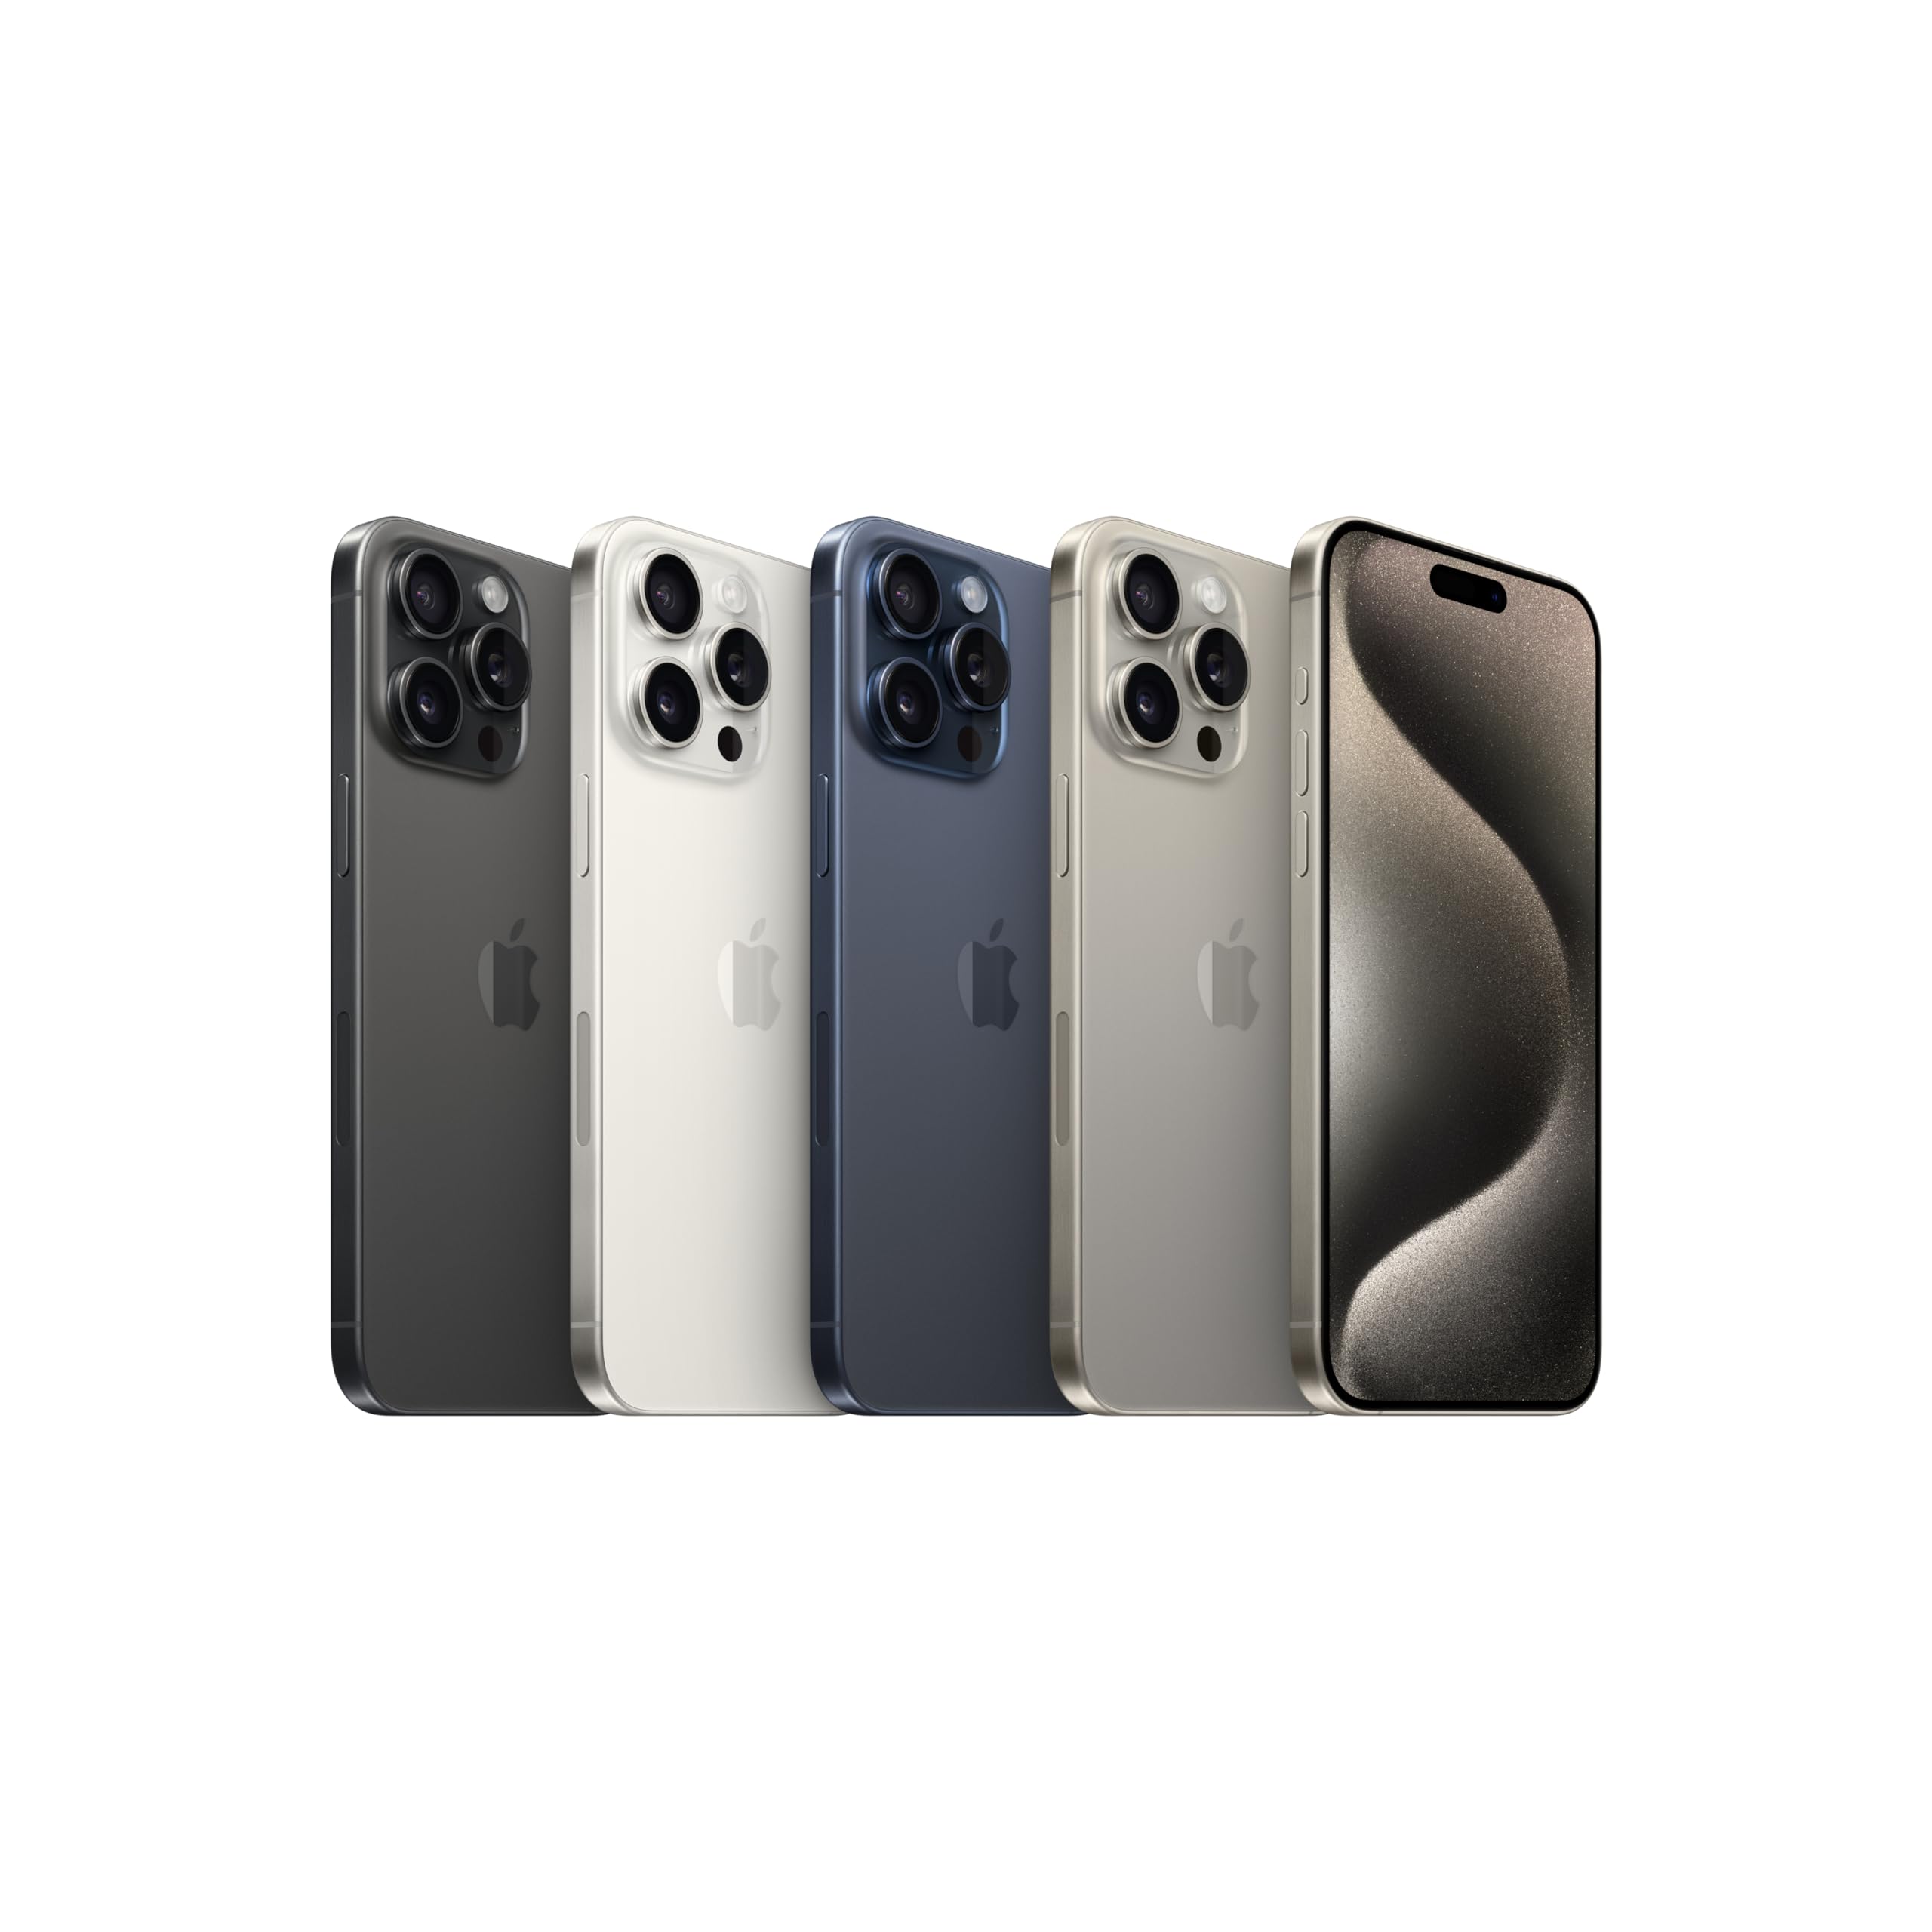 Apple iPhone 15 Pro Max (512 GB) - Natural Titanium | [Locked] | Boost Infinite plan required starting at $60/mo. | Unlimited Wireless | No trade-in needed to start | Get the latest iPhone every year